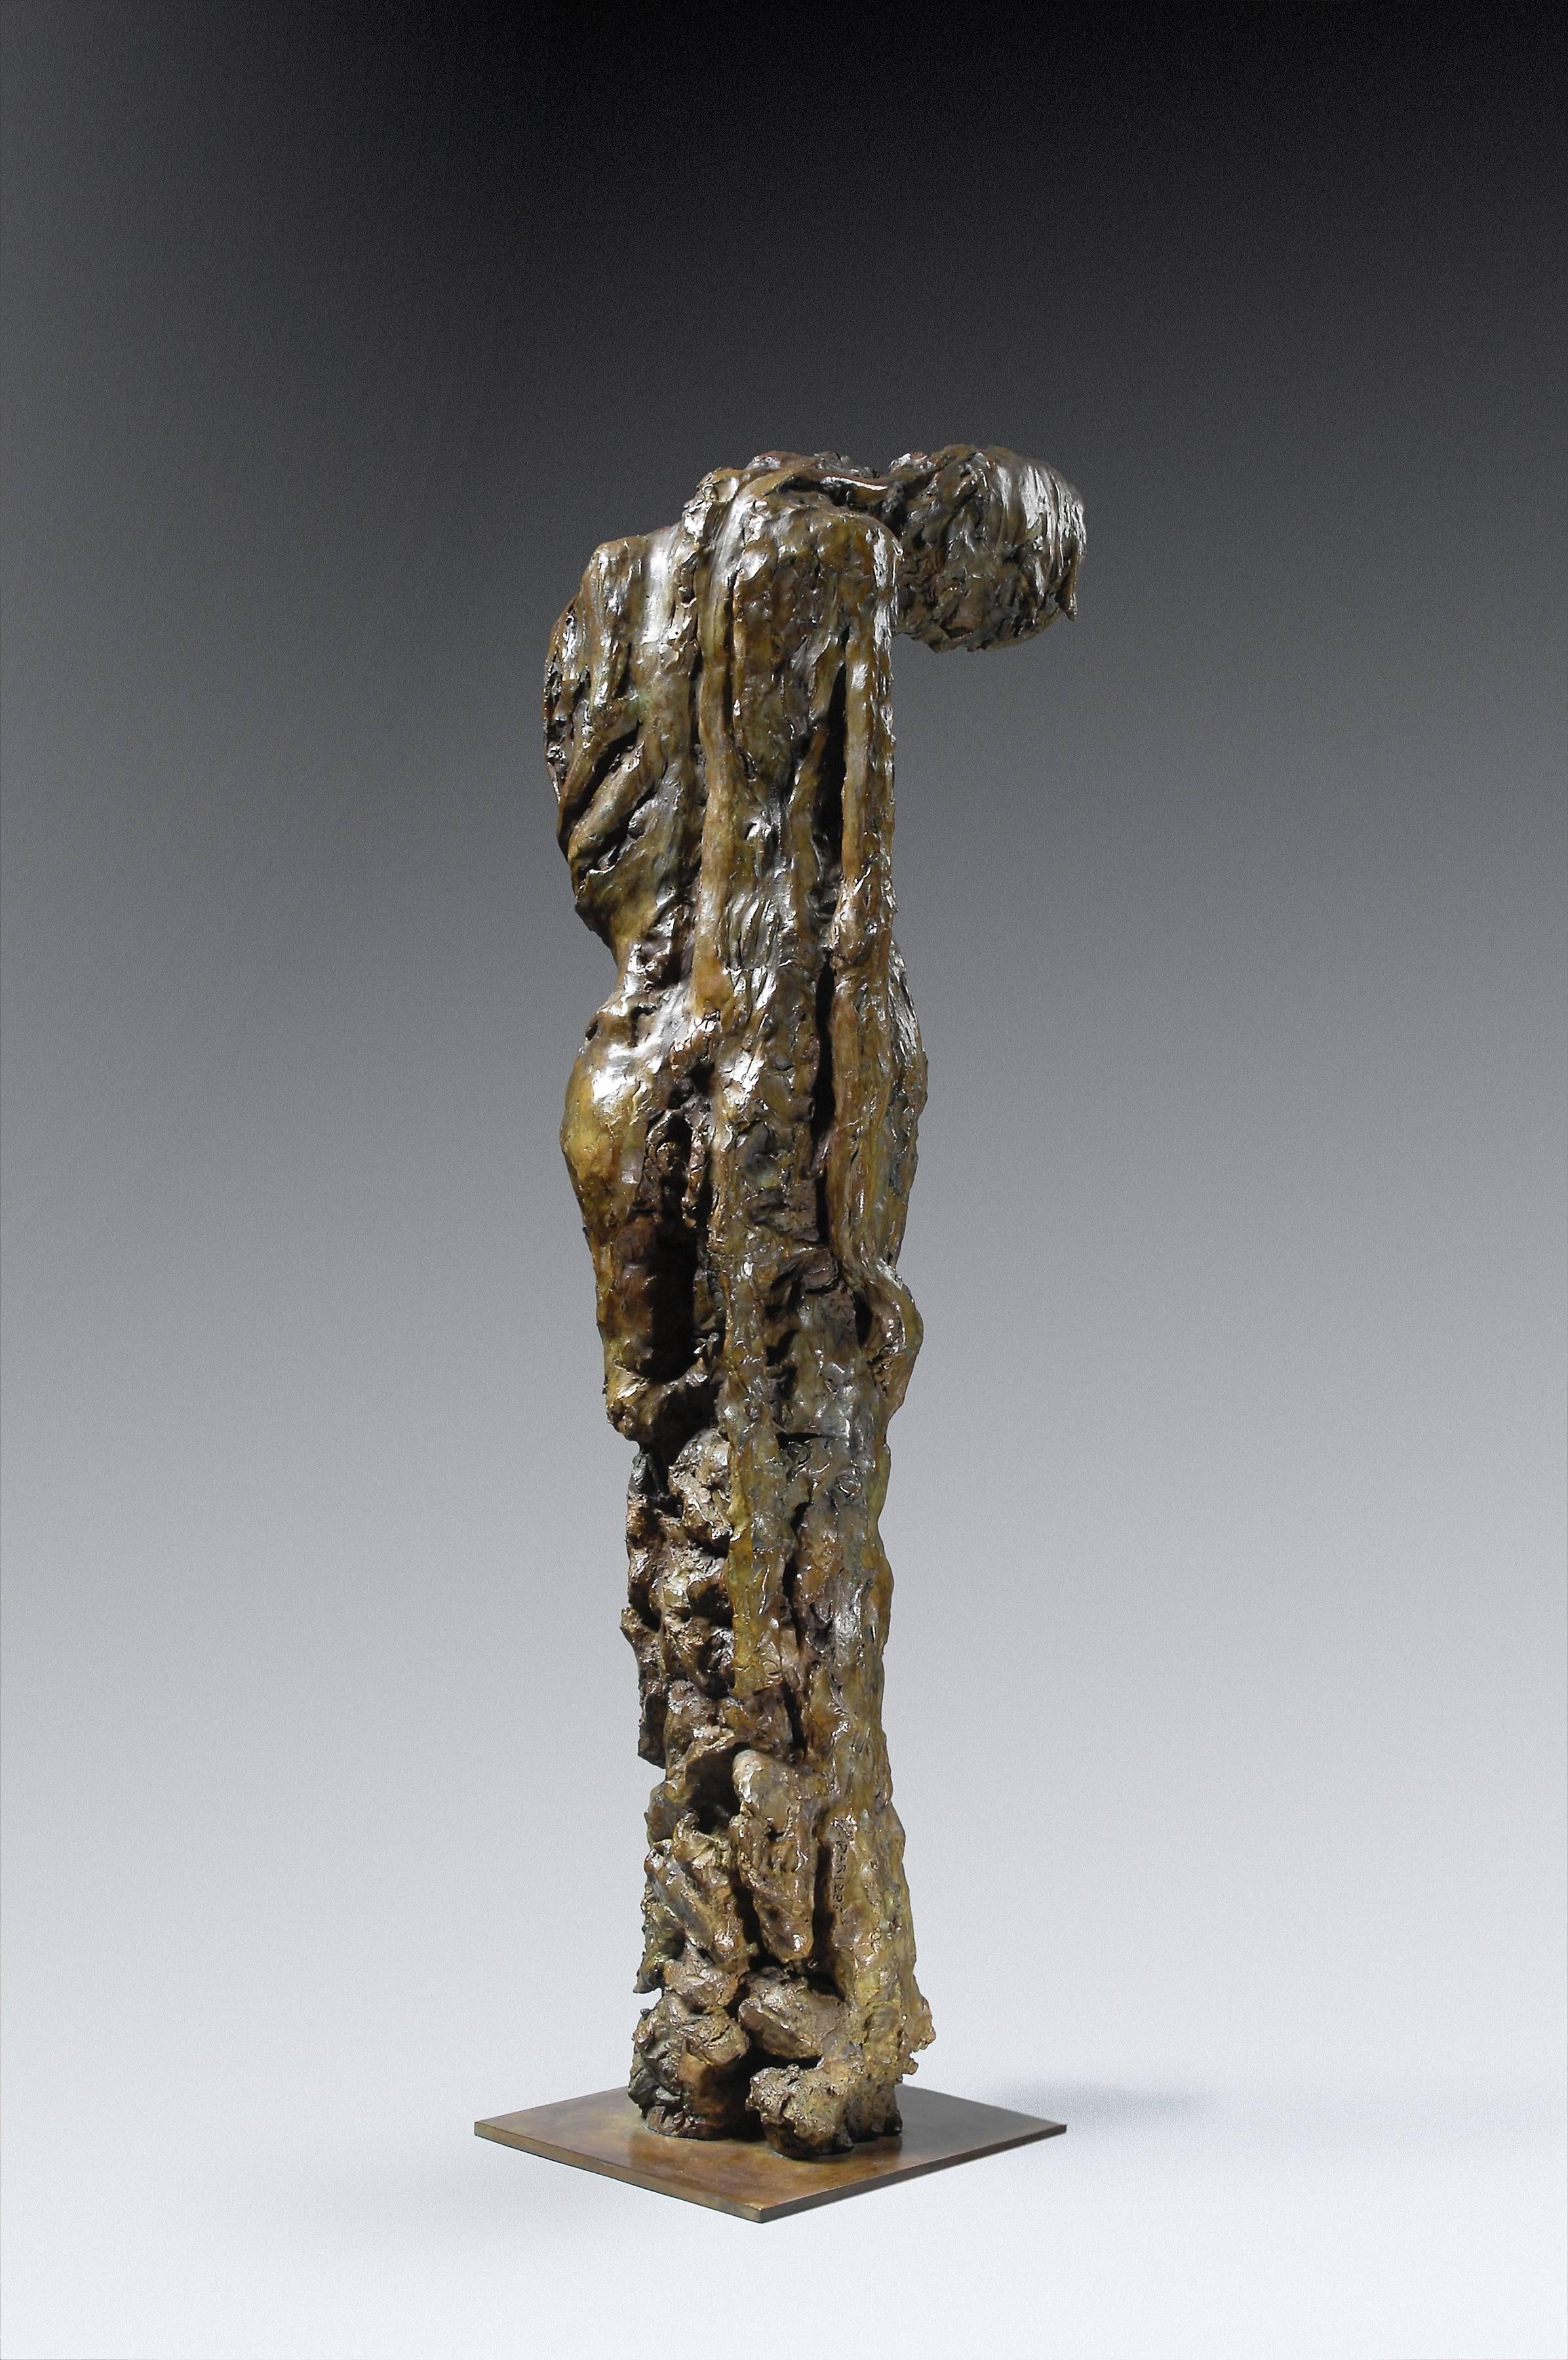 Bronze with brown patina, 1/8
Foundry’s mark Delval, 2008